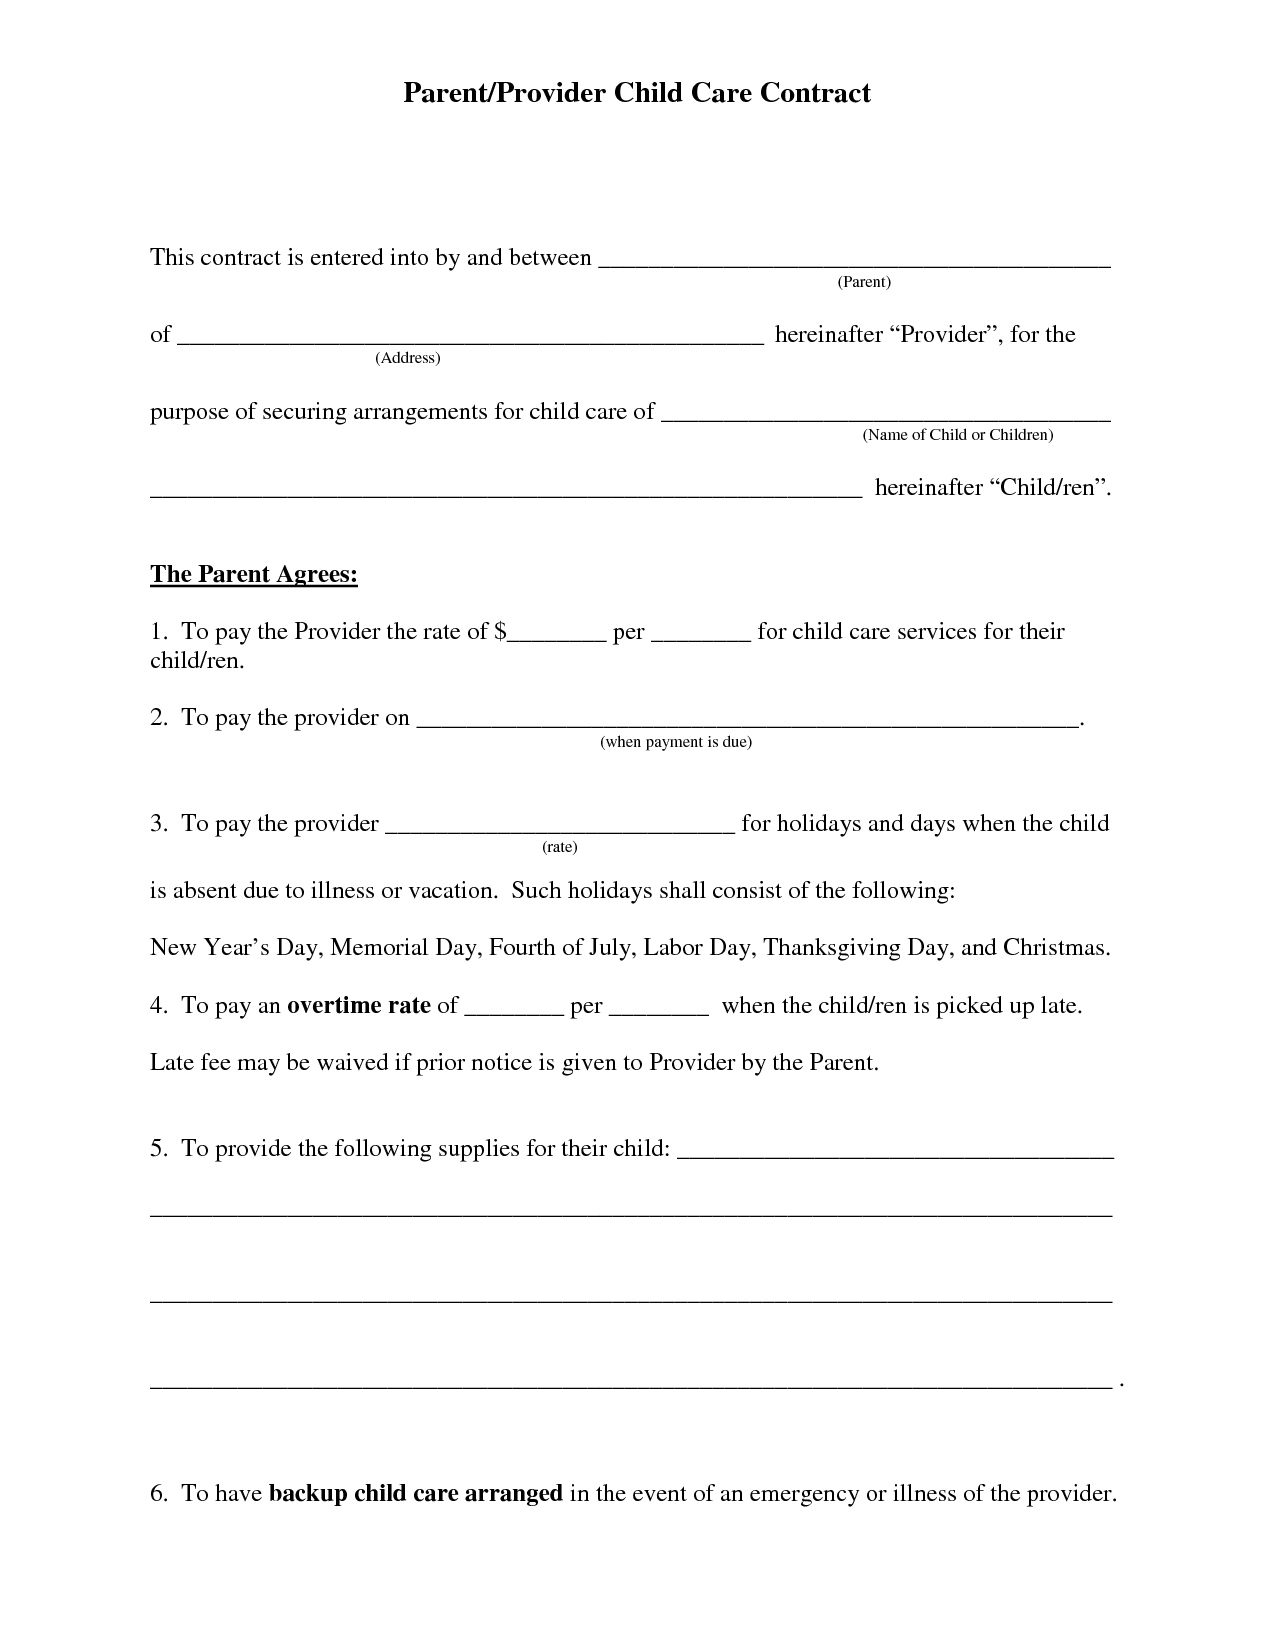 Free Daycare Contract Forms | Daycare Forms | Daycare Contract - Free Printable Daycare Forms